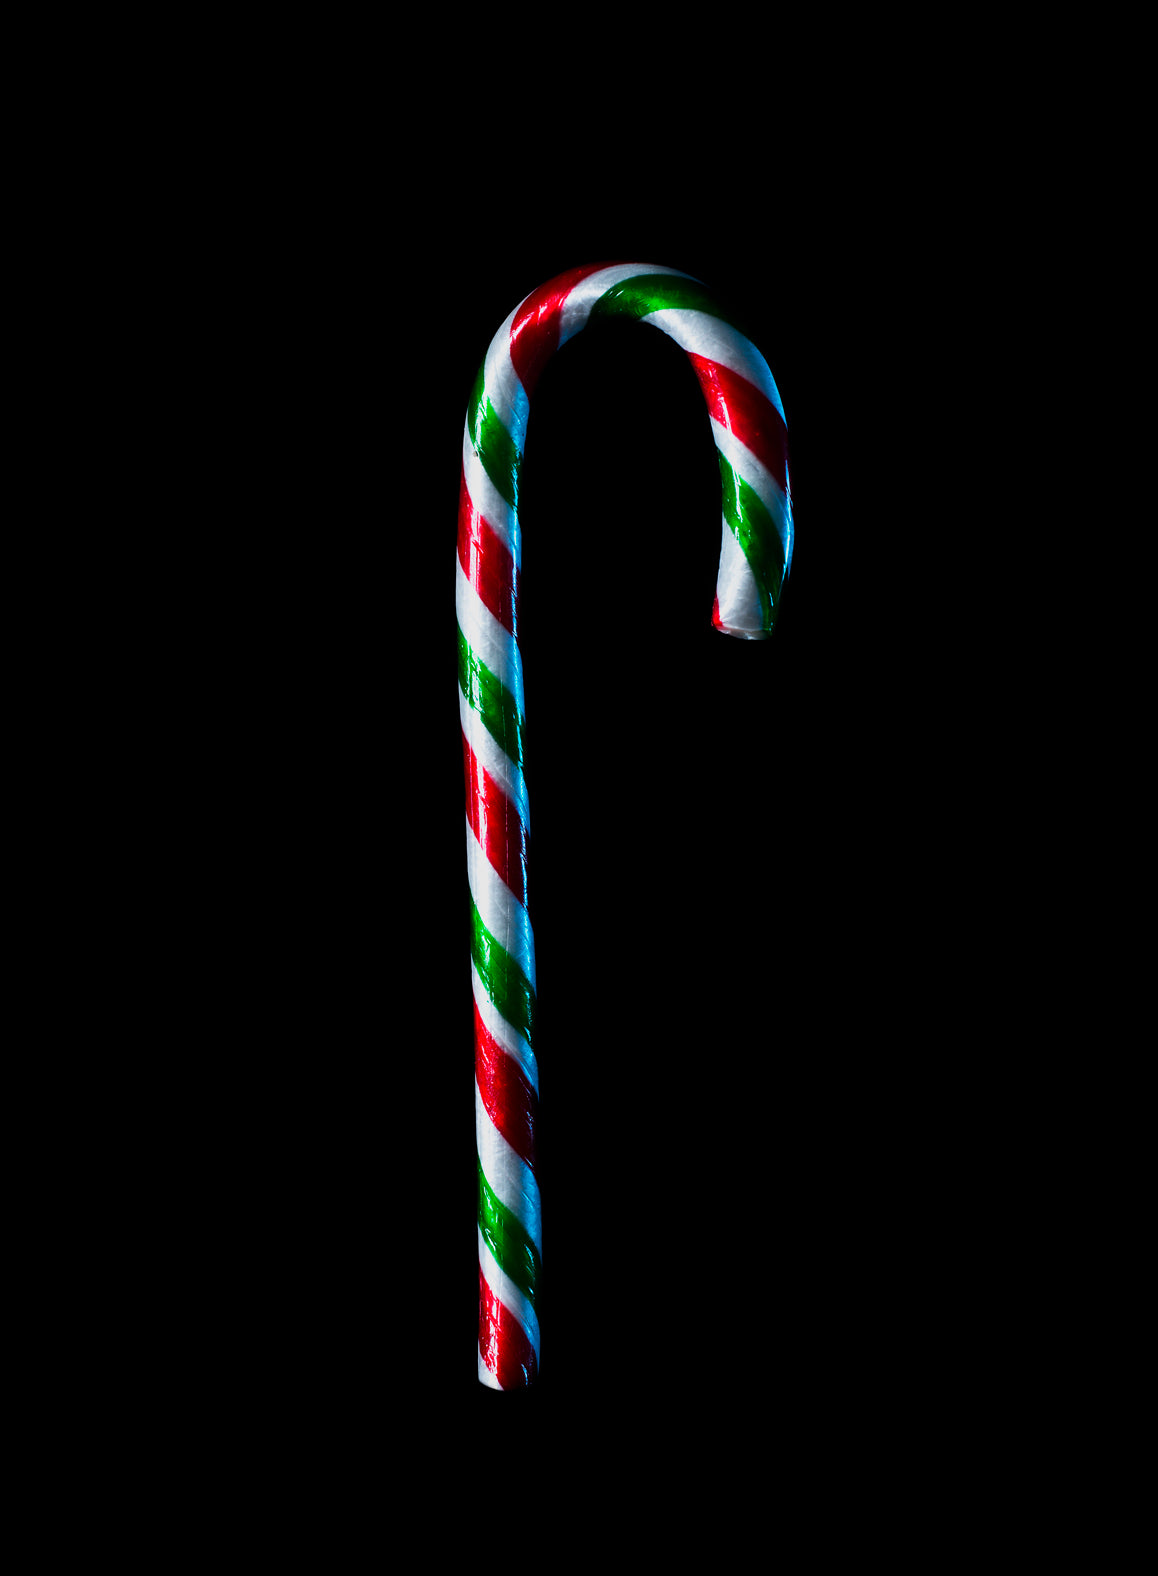 candy cane on black